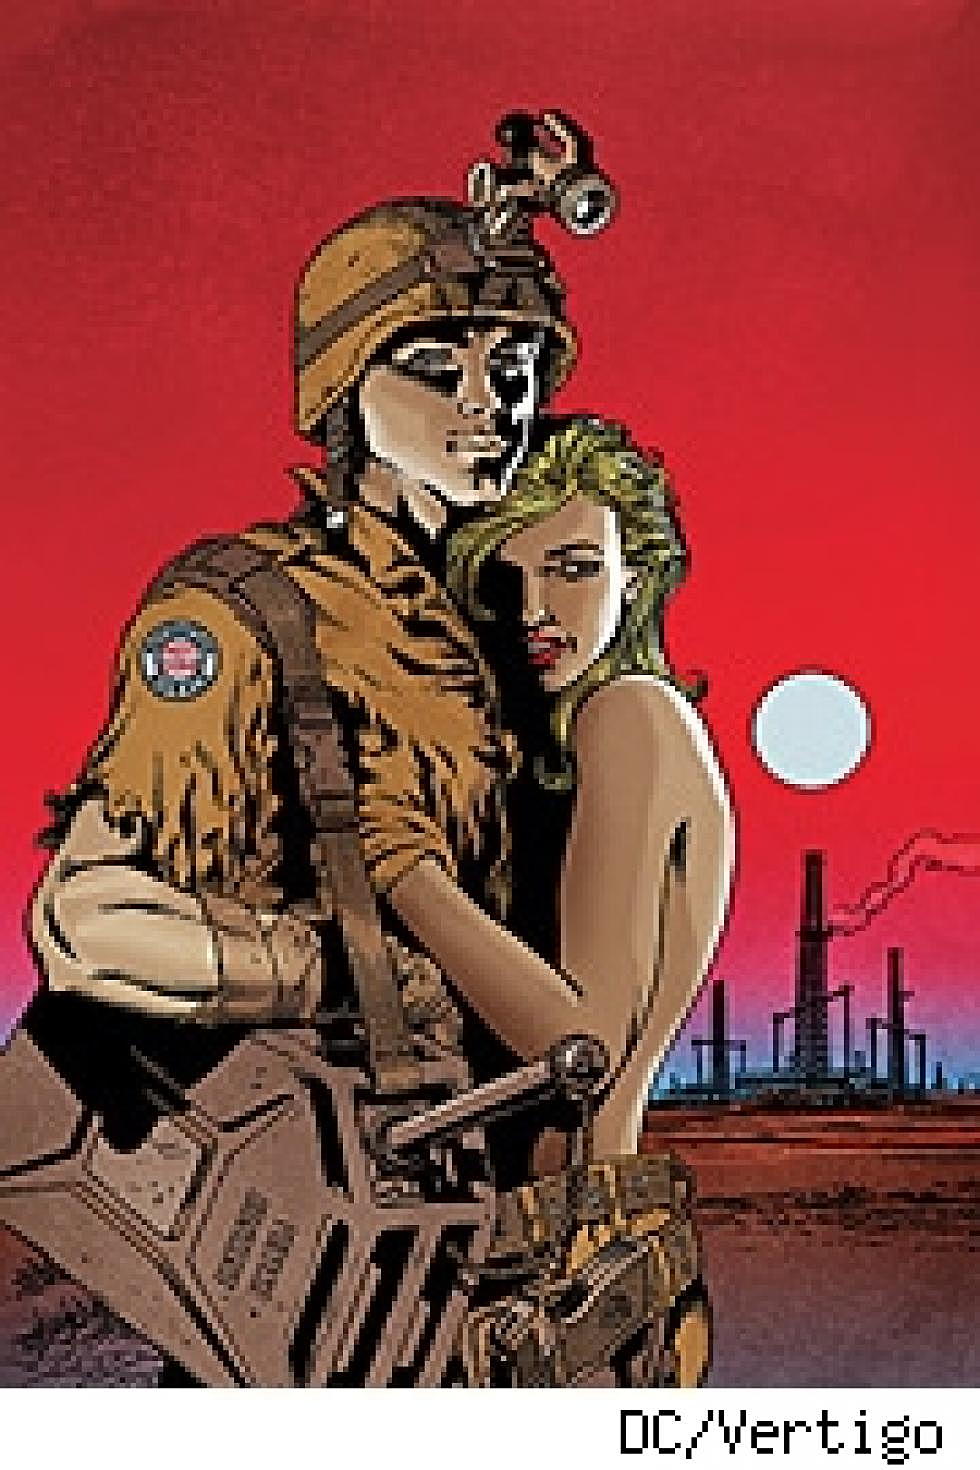 Armed Forces Magazine Checks Out DC’s ‘Army@Love’